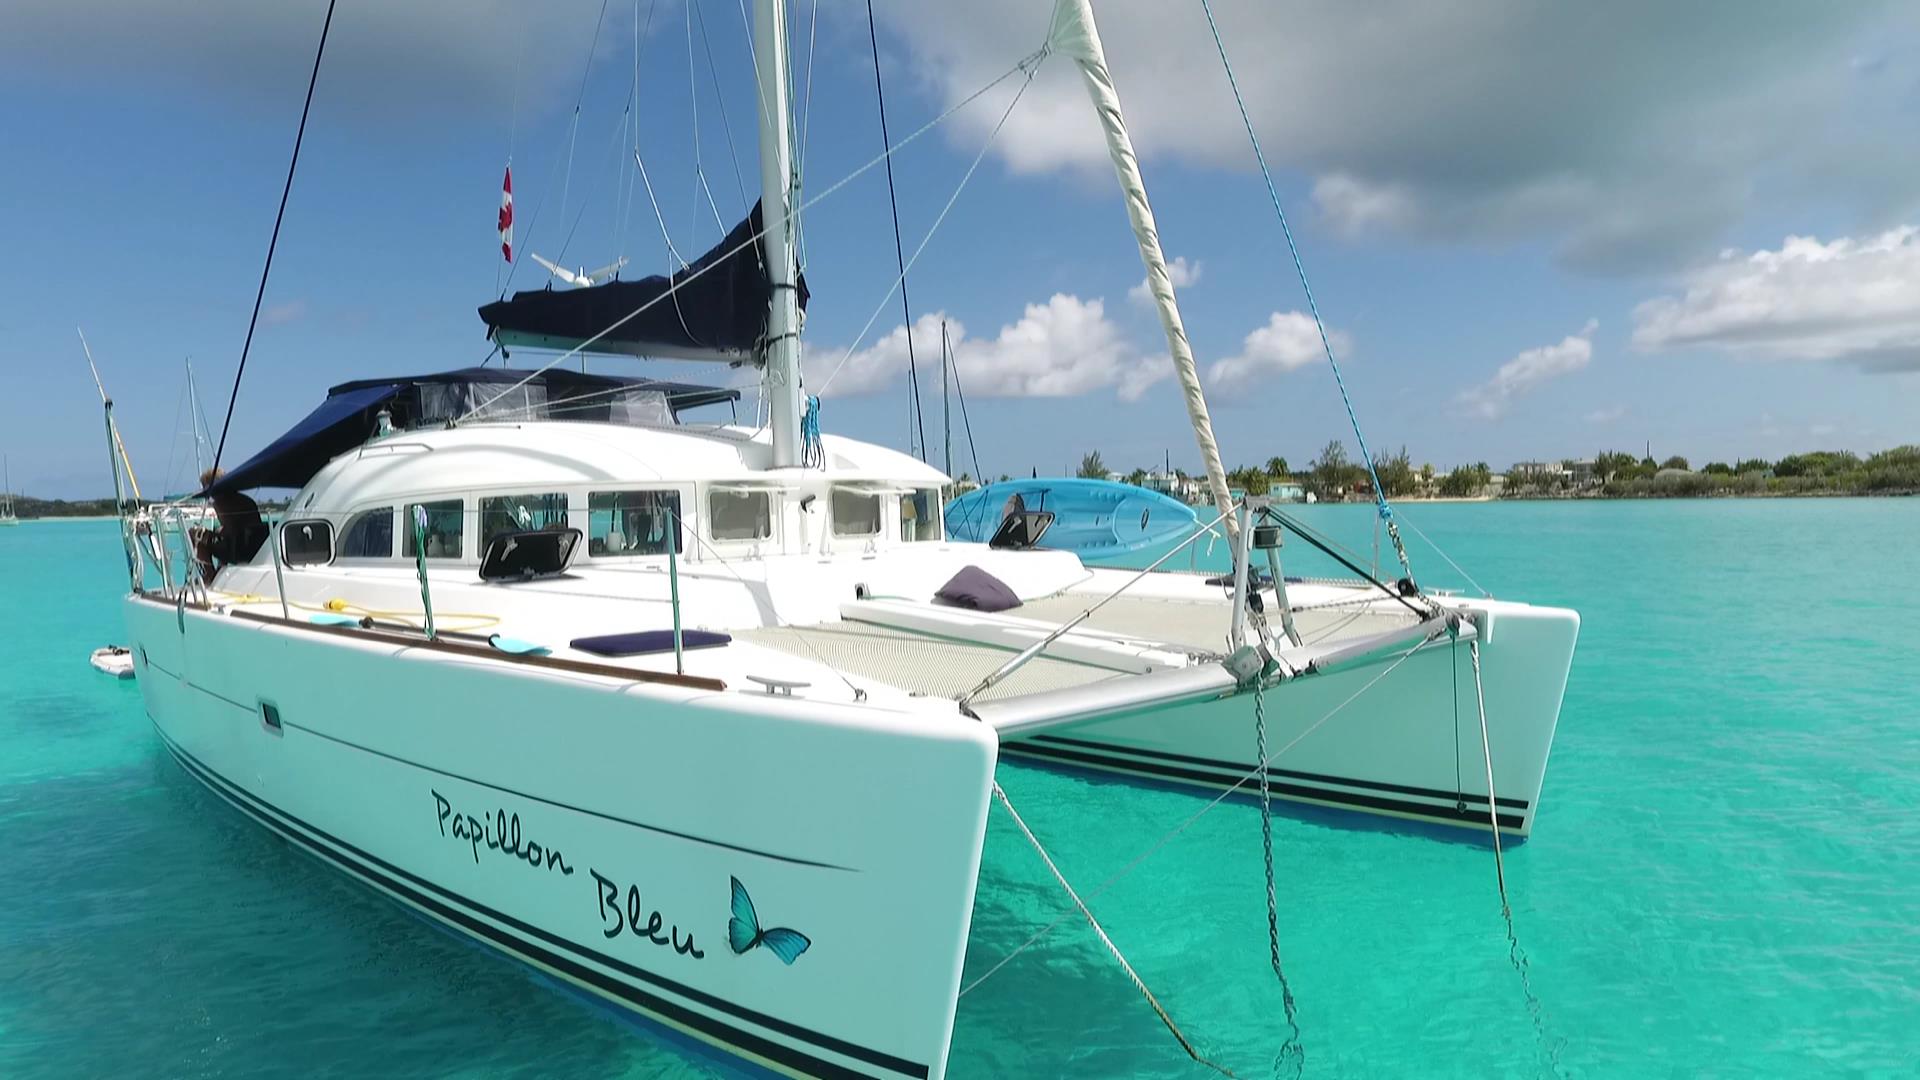 Latest Listings and Price Cuts this Week on Catamarans.com 